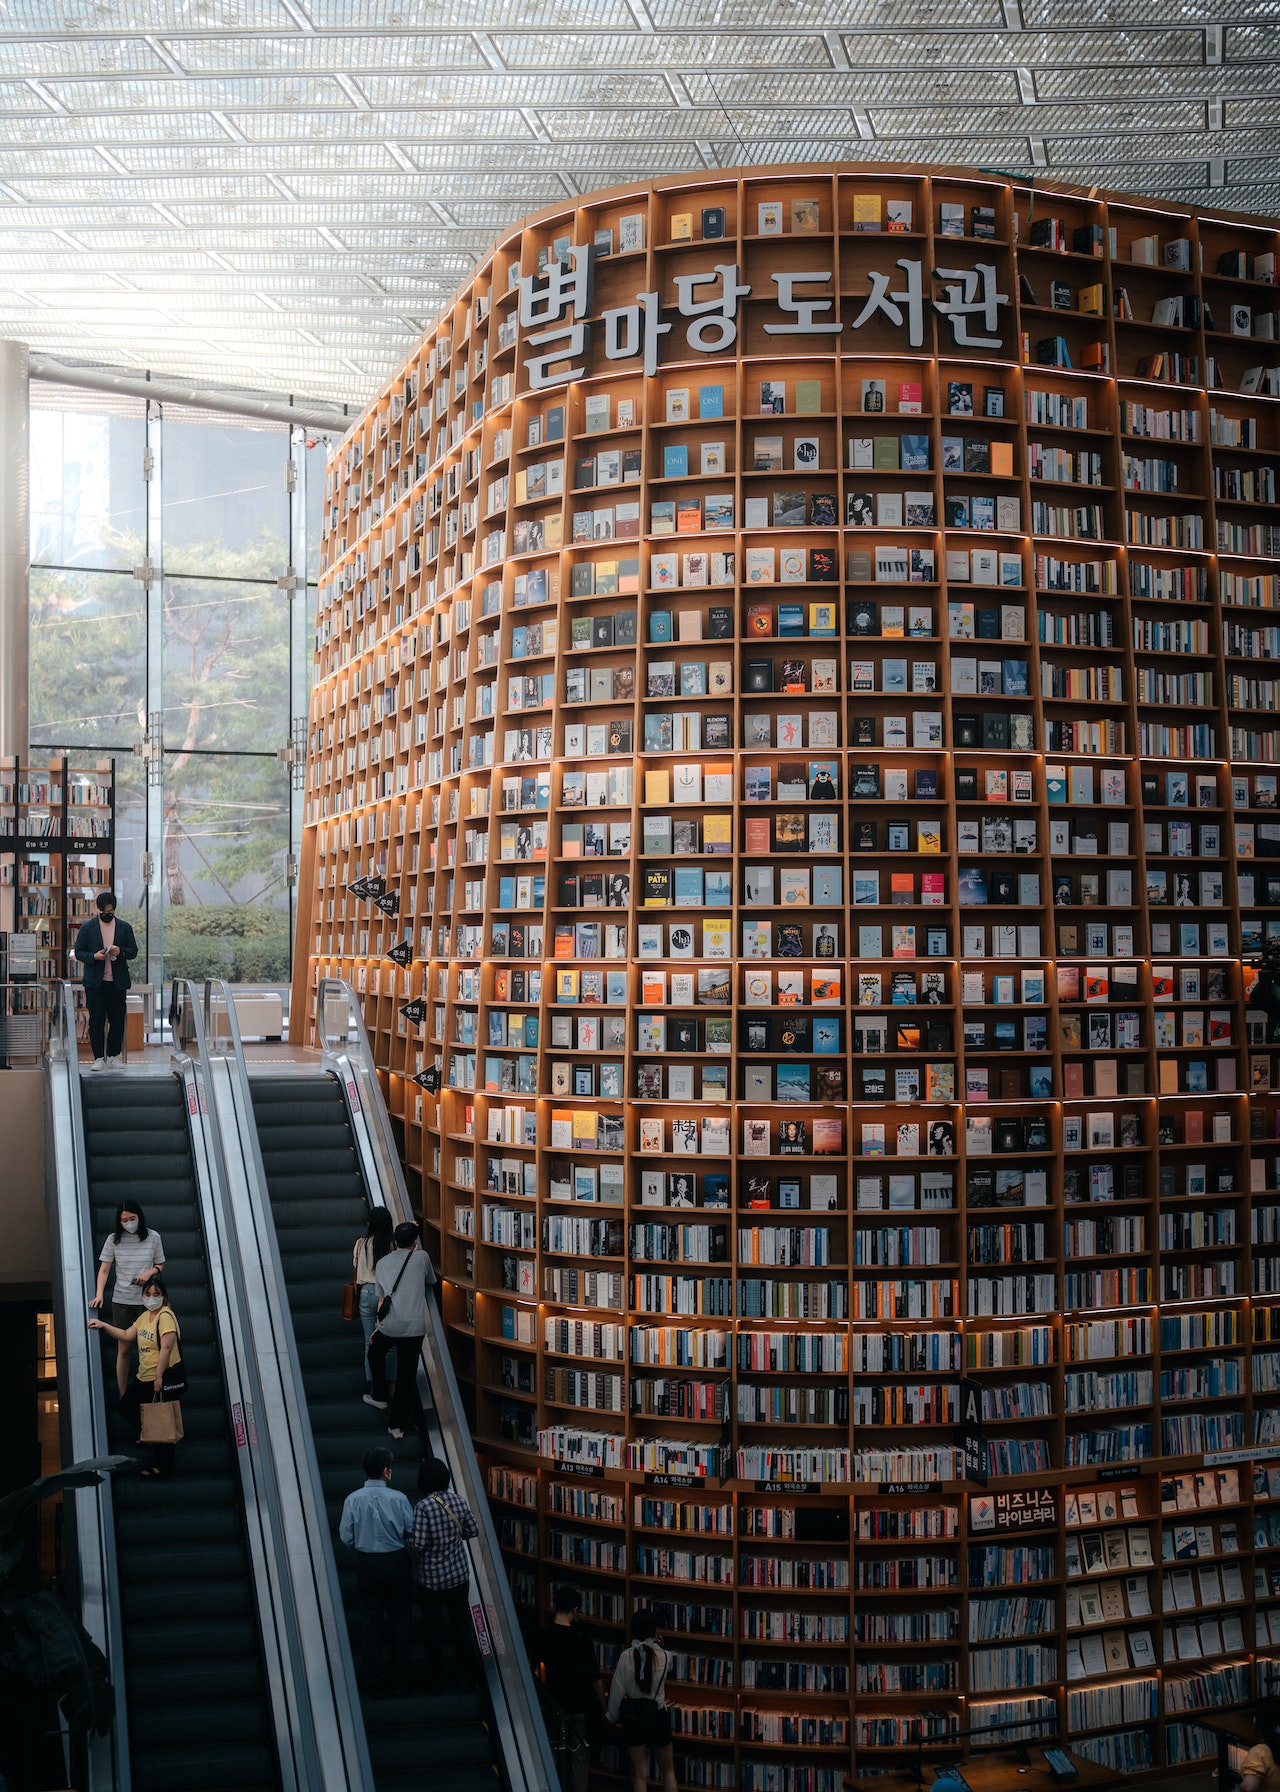 Starfield Library inside COEX Shopping Mall